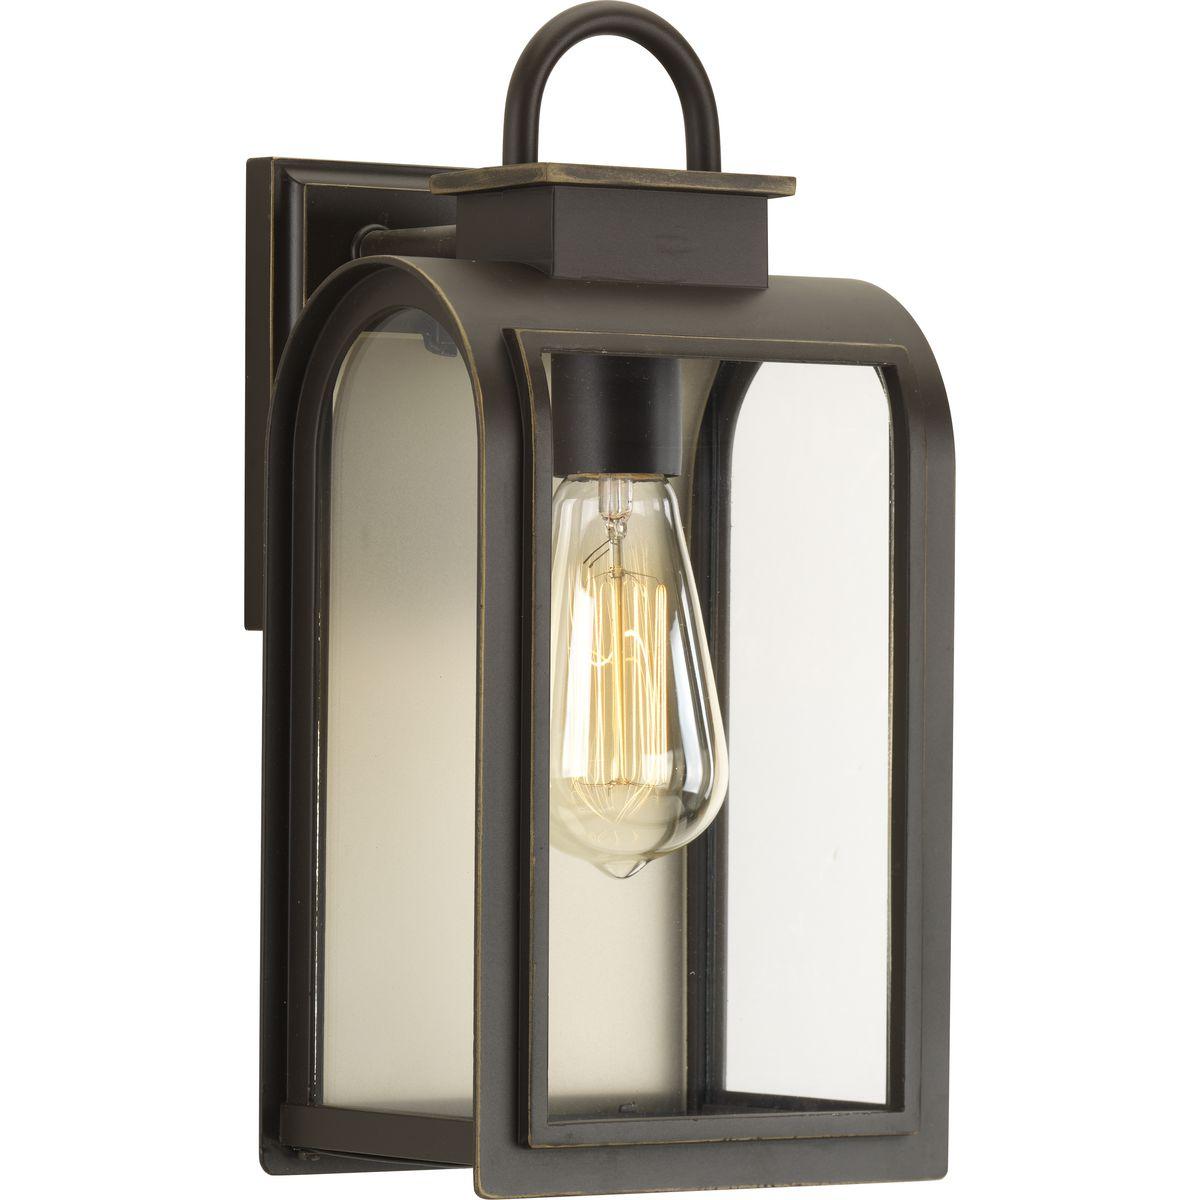 Hubbell P6030-108 One-light small wall lantern in a Cape Cod-inspired frame pays homage to a classic nautical style. Light output and geometric forms offer visual interest to outdoor exteriors. Clear glass windows are paired with a unique umber reflector panel that provide